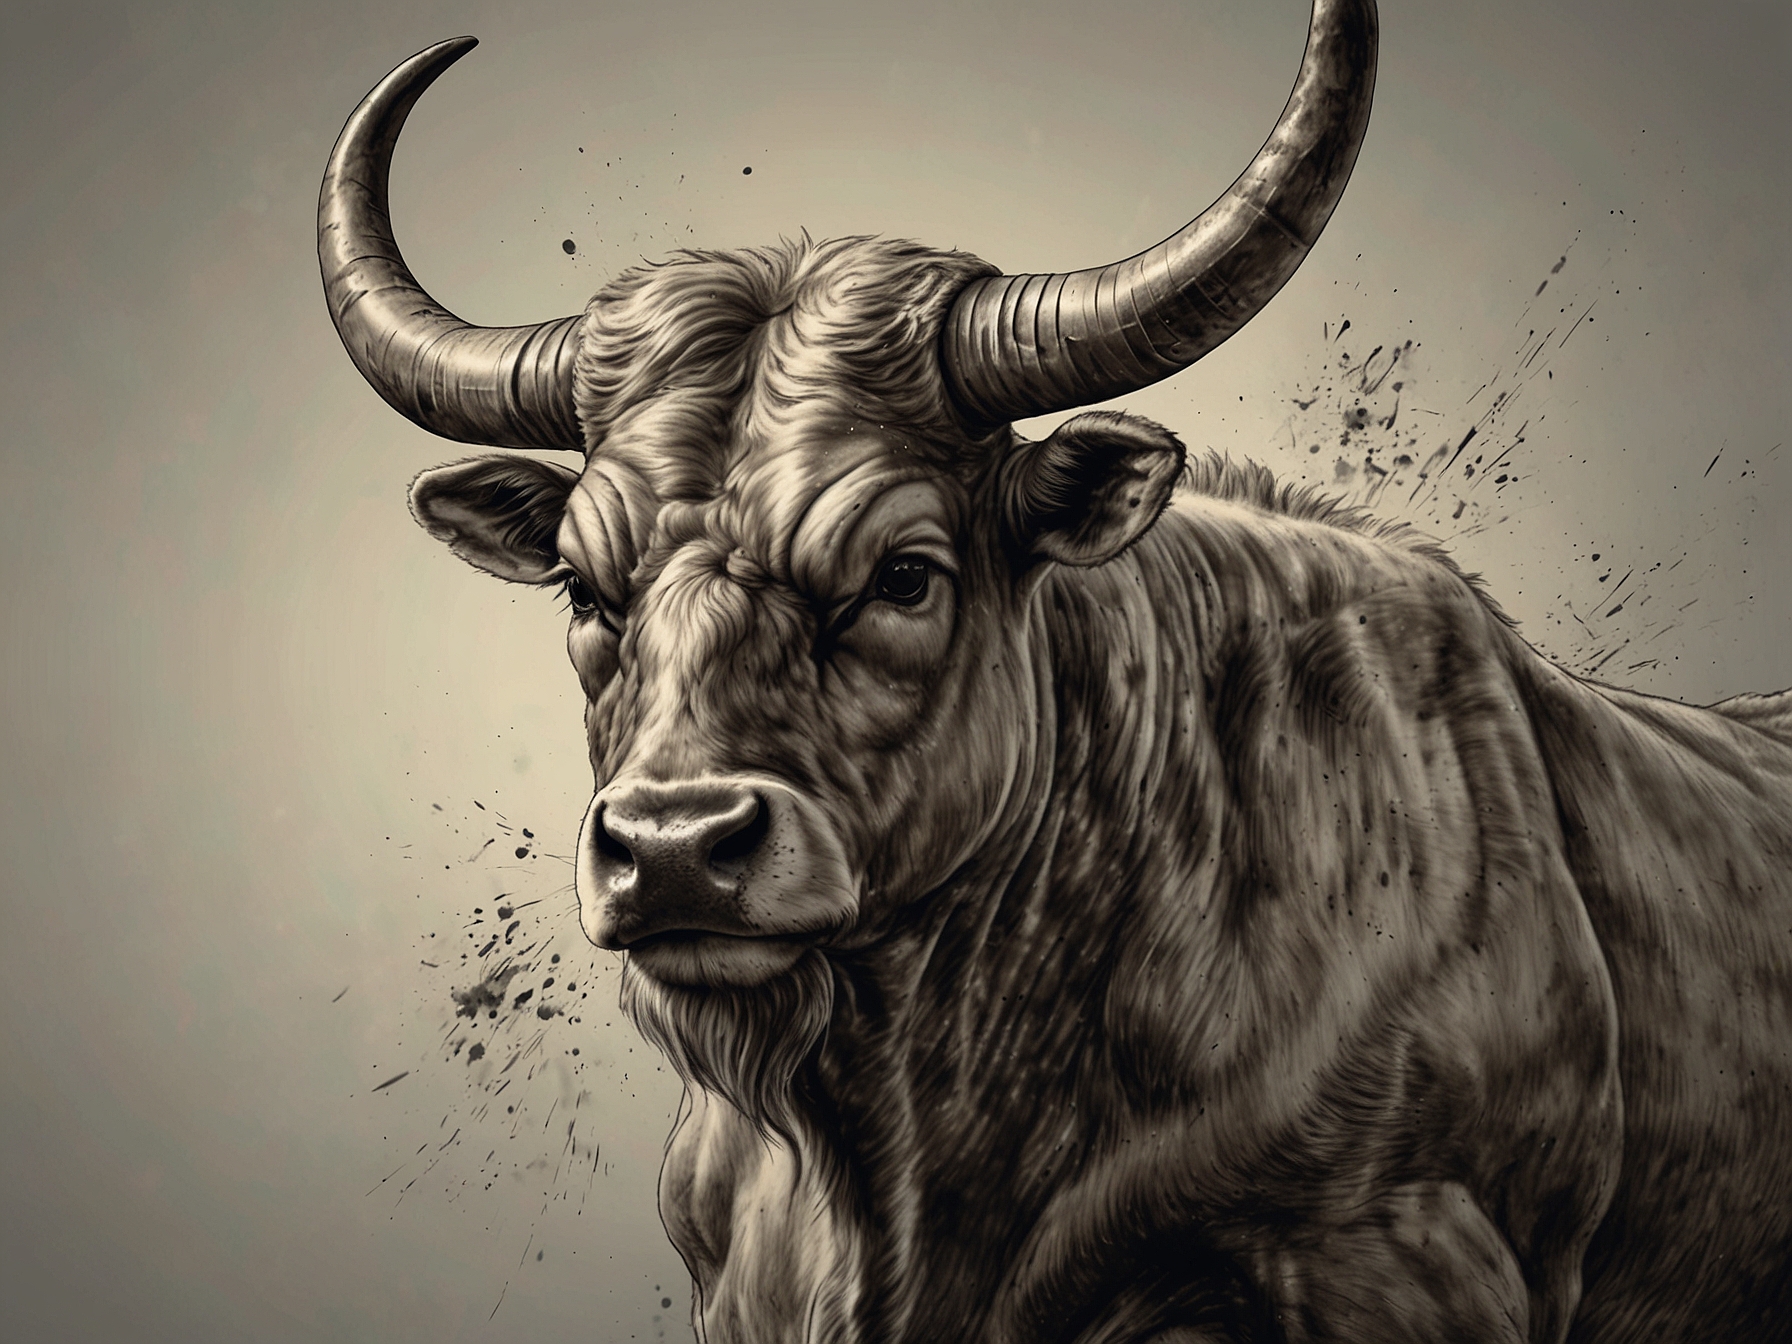 An illustration of a determined Taurus symbolizing focus and dedication to overcoming obstacles with passion.